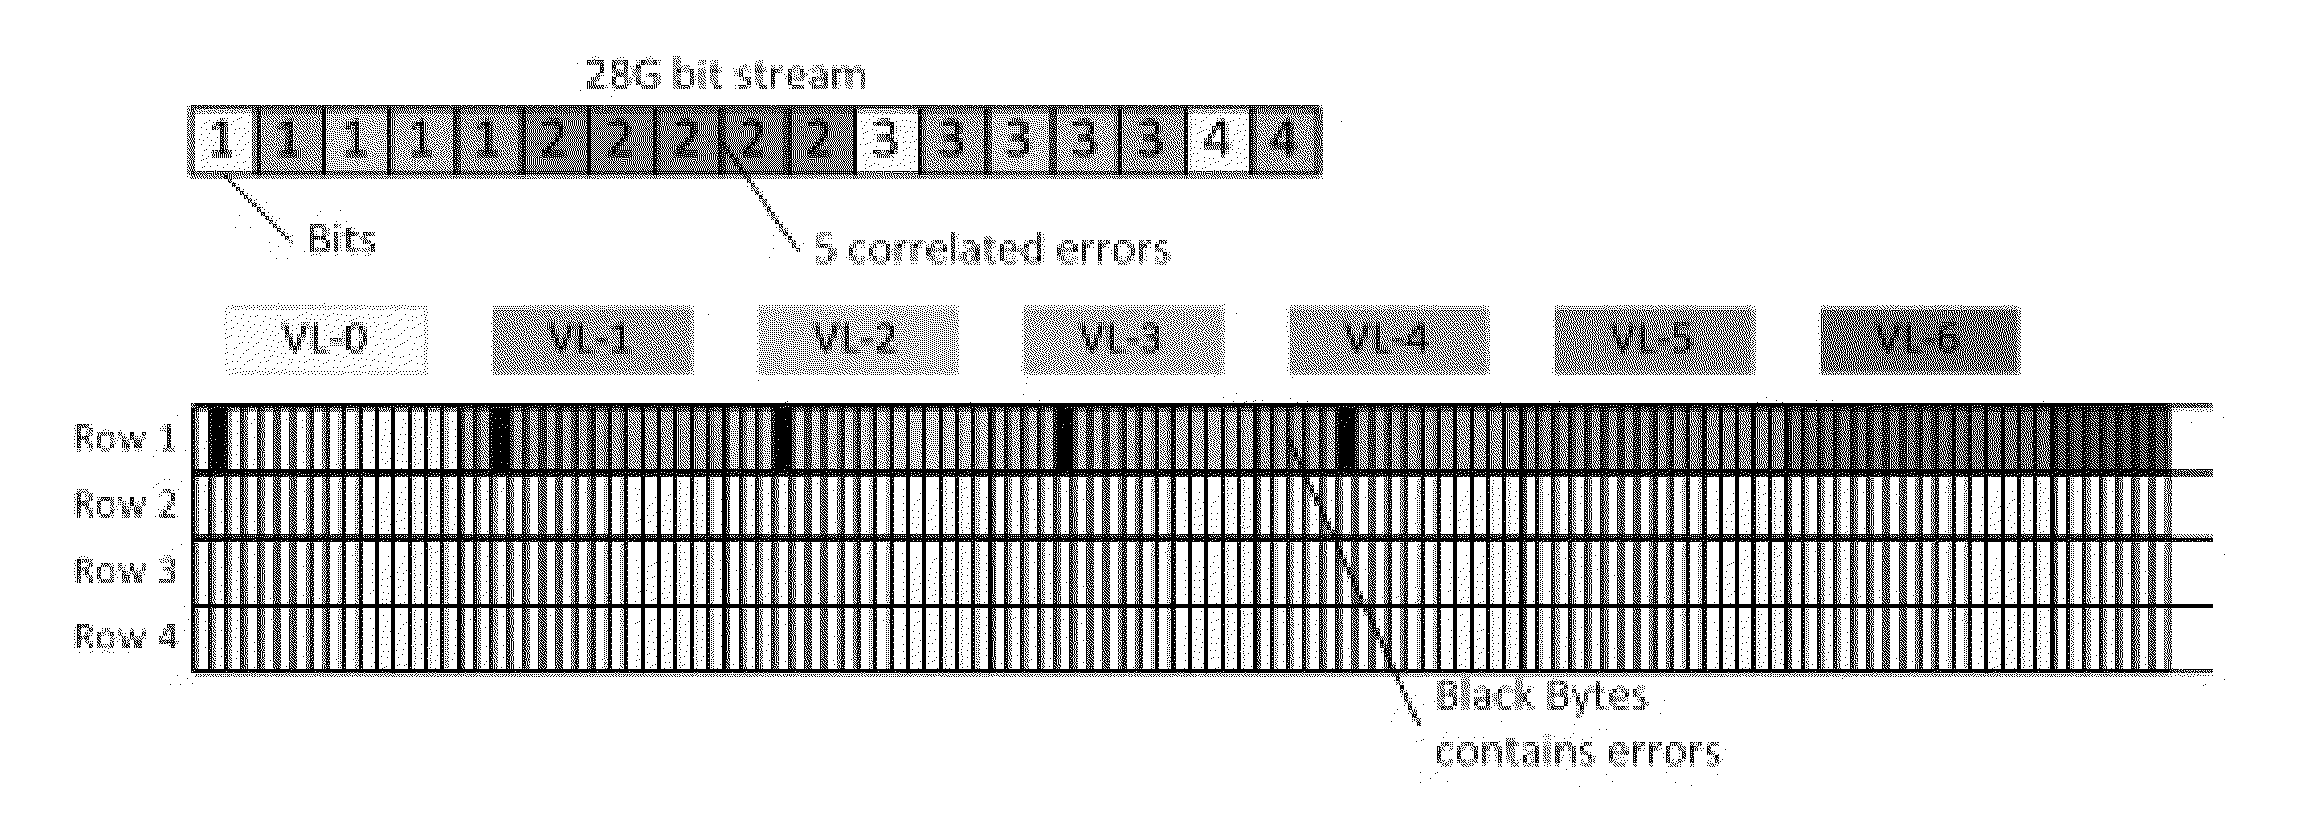 Method for increasing the probability of error correction in an optical communication channel